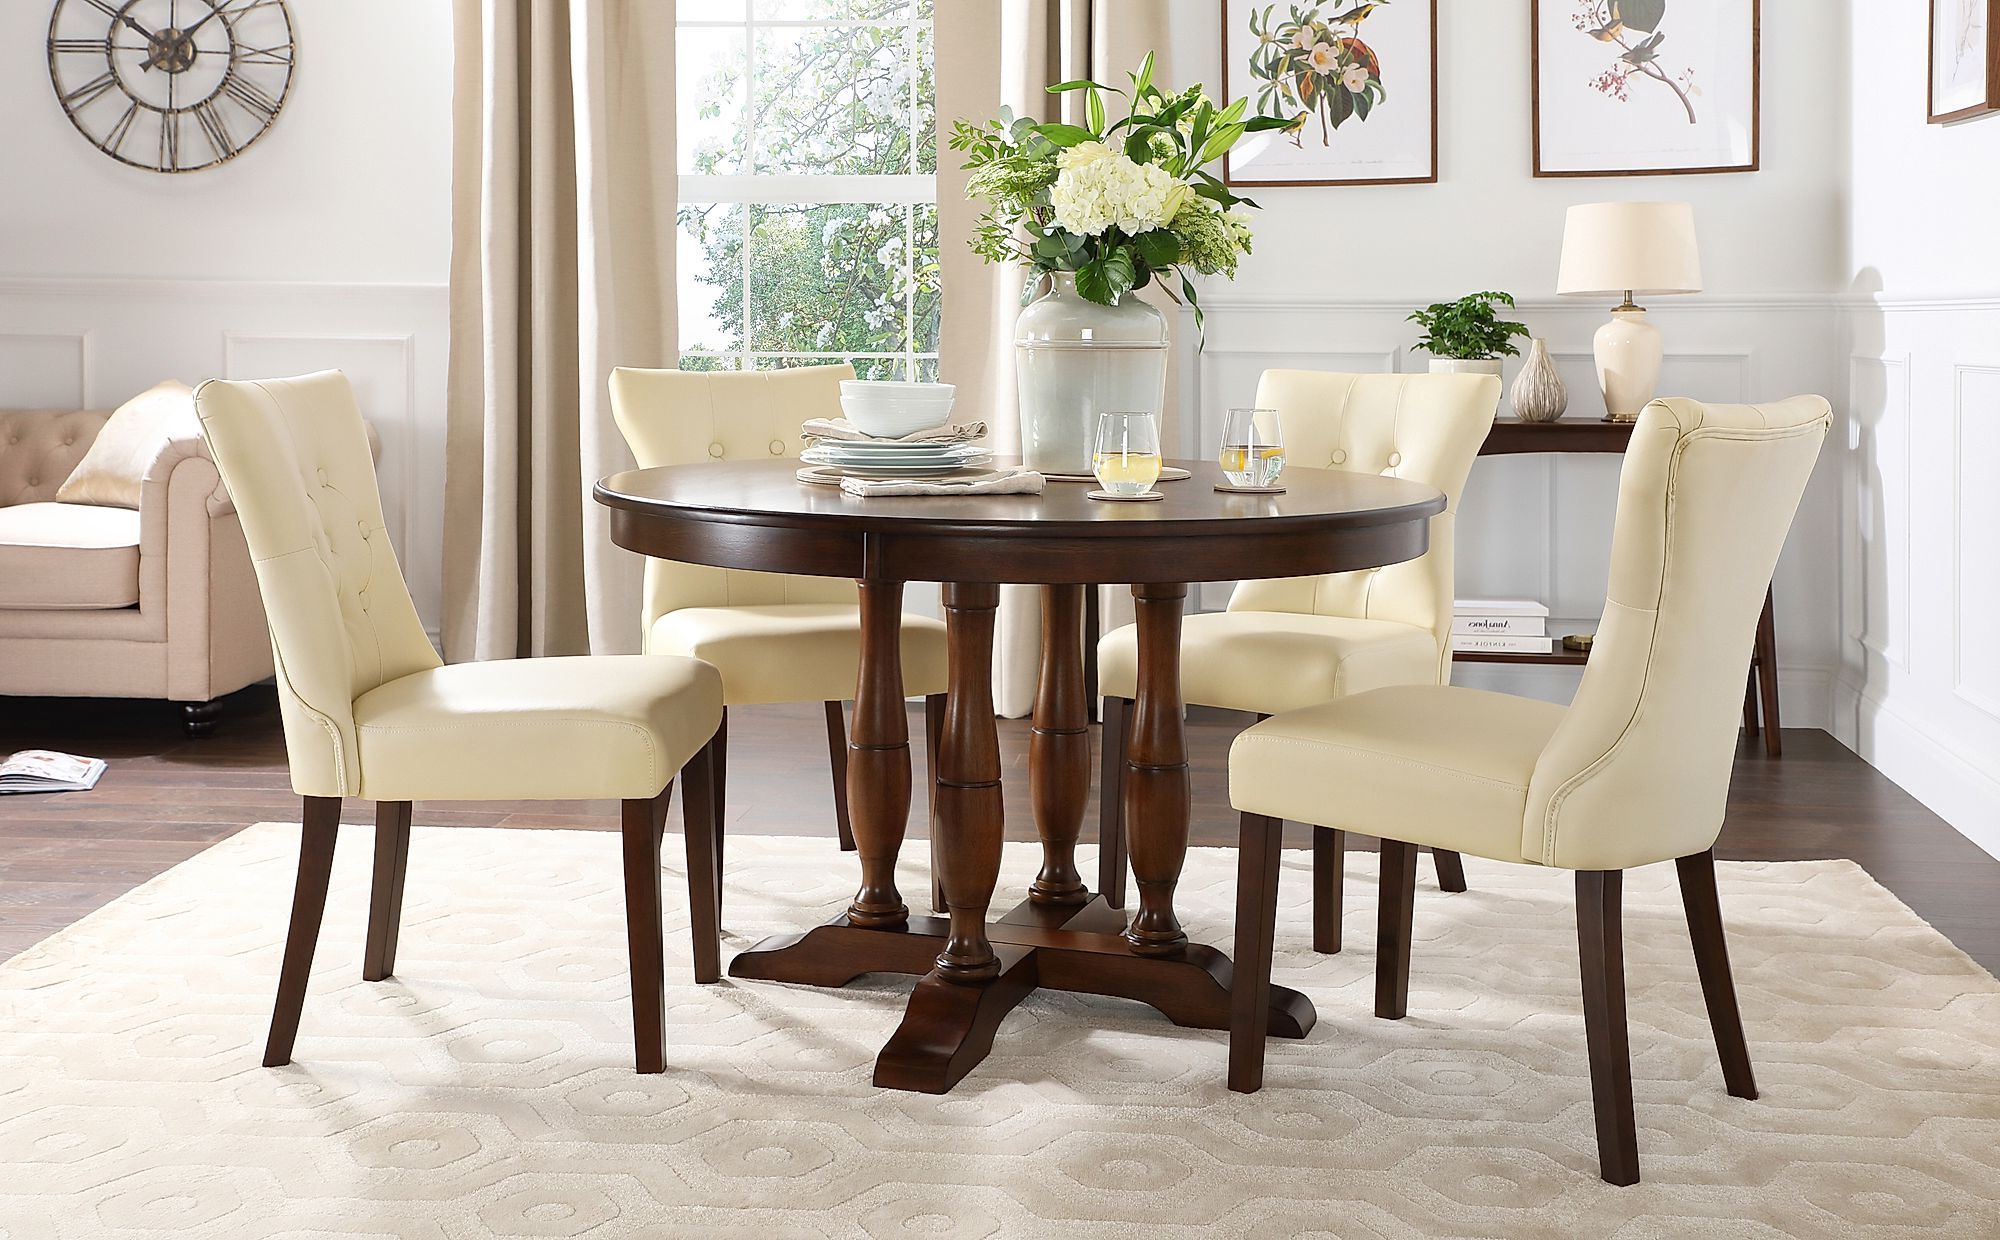 Preferred Highgrove Round Dark Wood Dining Table With 4 Bewley Ivory With Regard To Dark Brown Round Dining Tables (View 10 of 15)